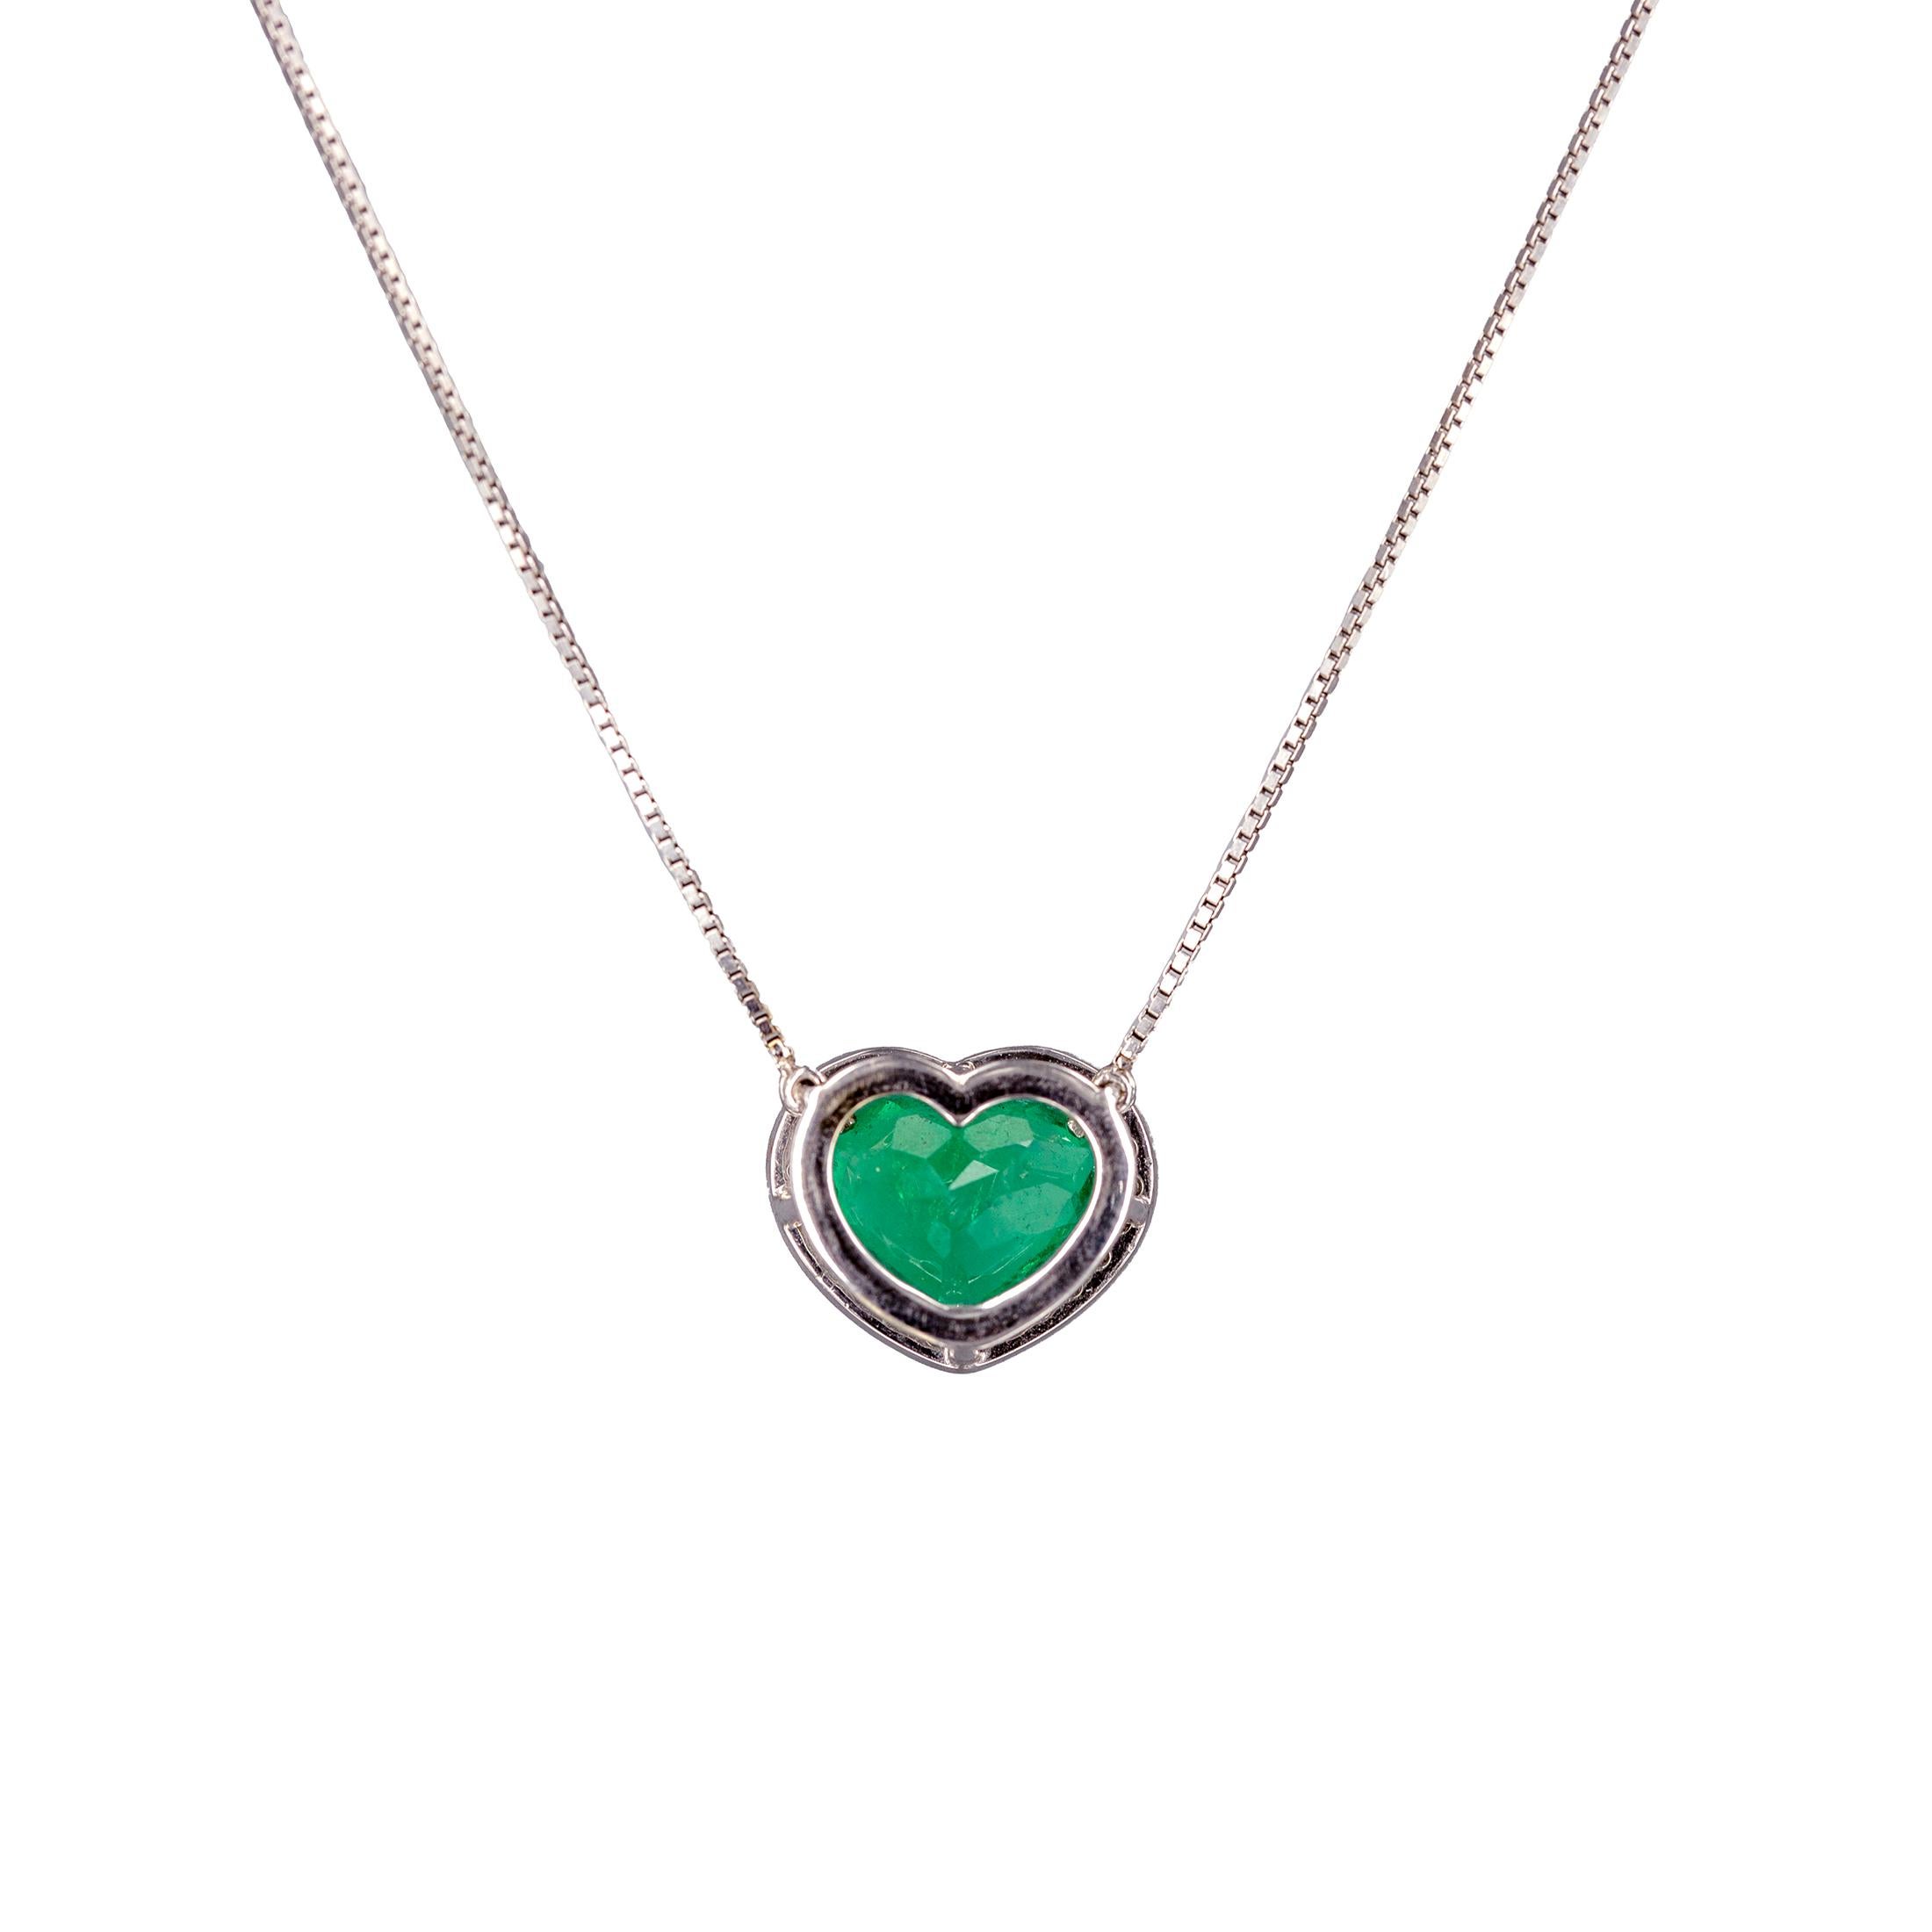 18 karat white and yellow gold pendant set 
with 5.98 carat heart shaped vivid green natural emerald from Muzo, Colombia and
25 diamonds of total weight 0.42 carat. The chain is attached, has 2 extension jump rings and fitted with a lobster clasp.